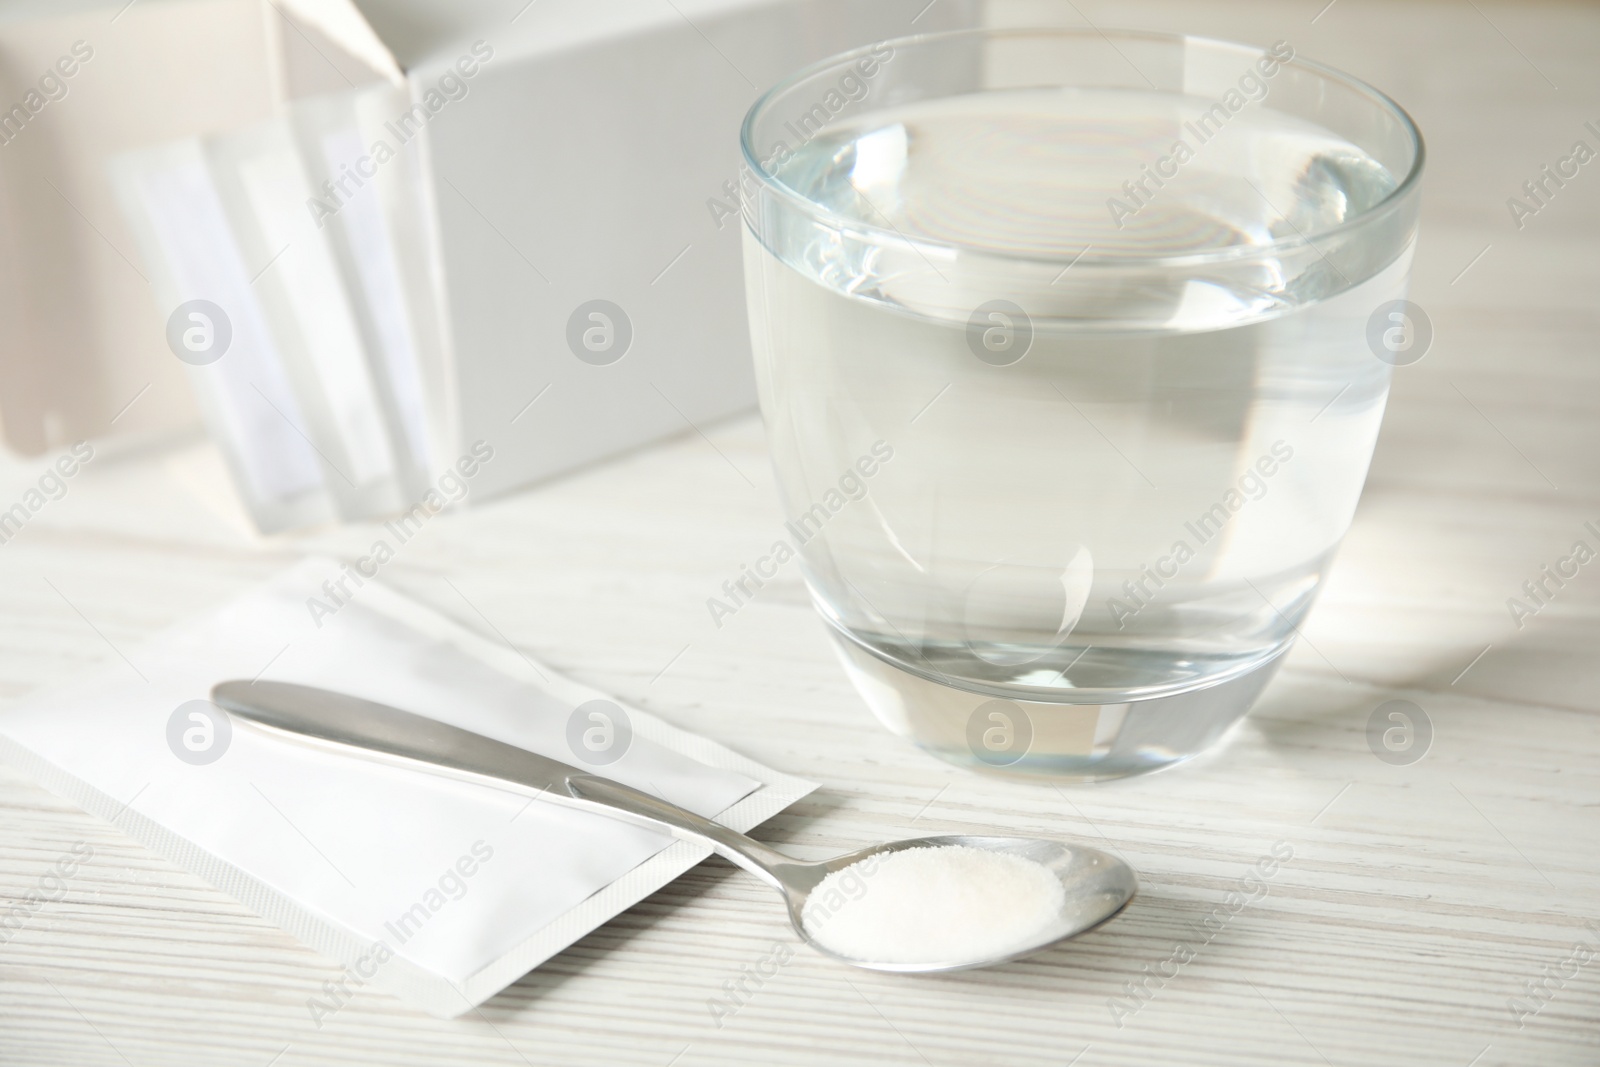 Photo of Medicine sachets, glass of water and spoon on white table